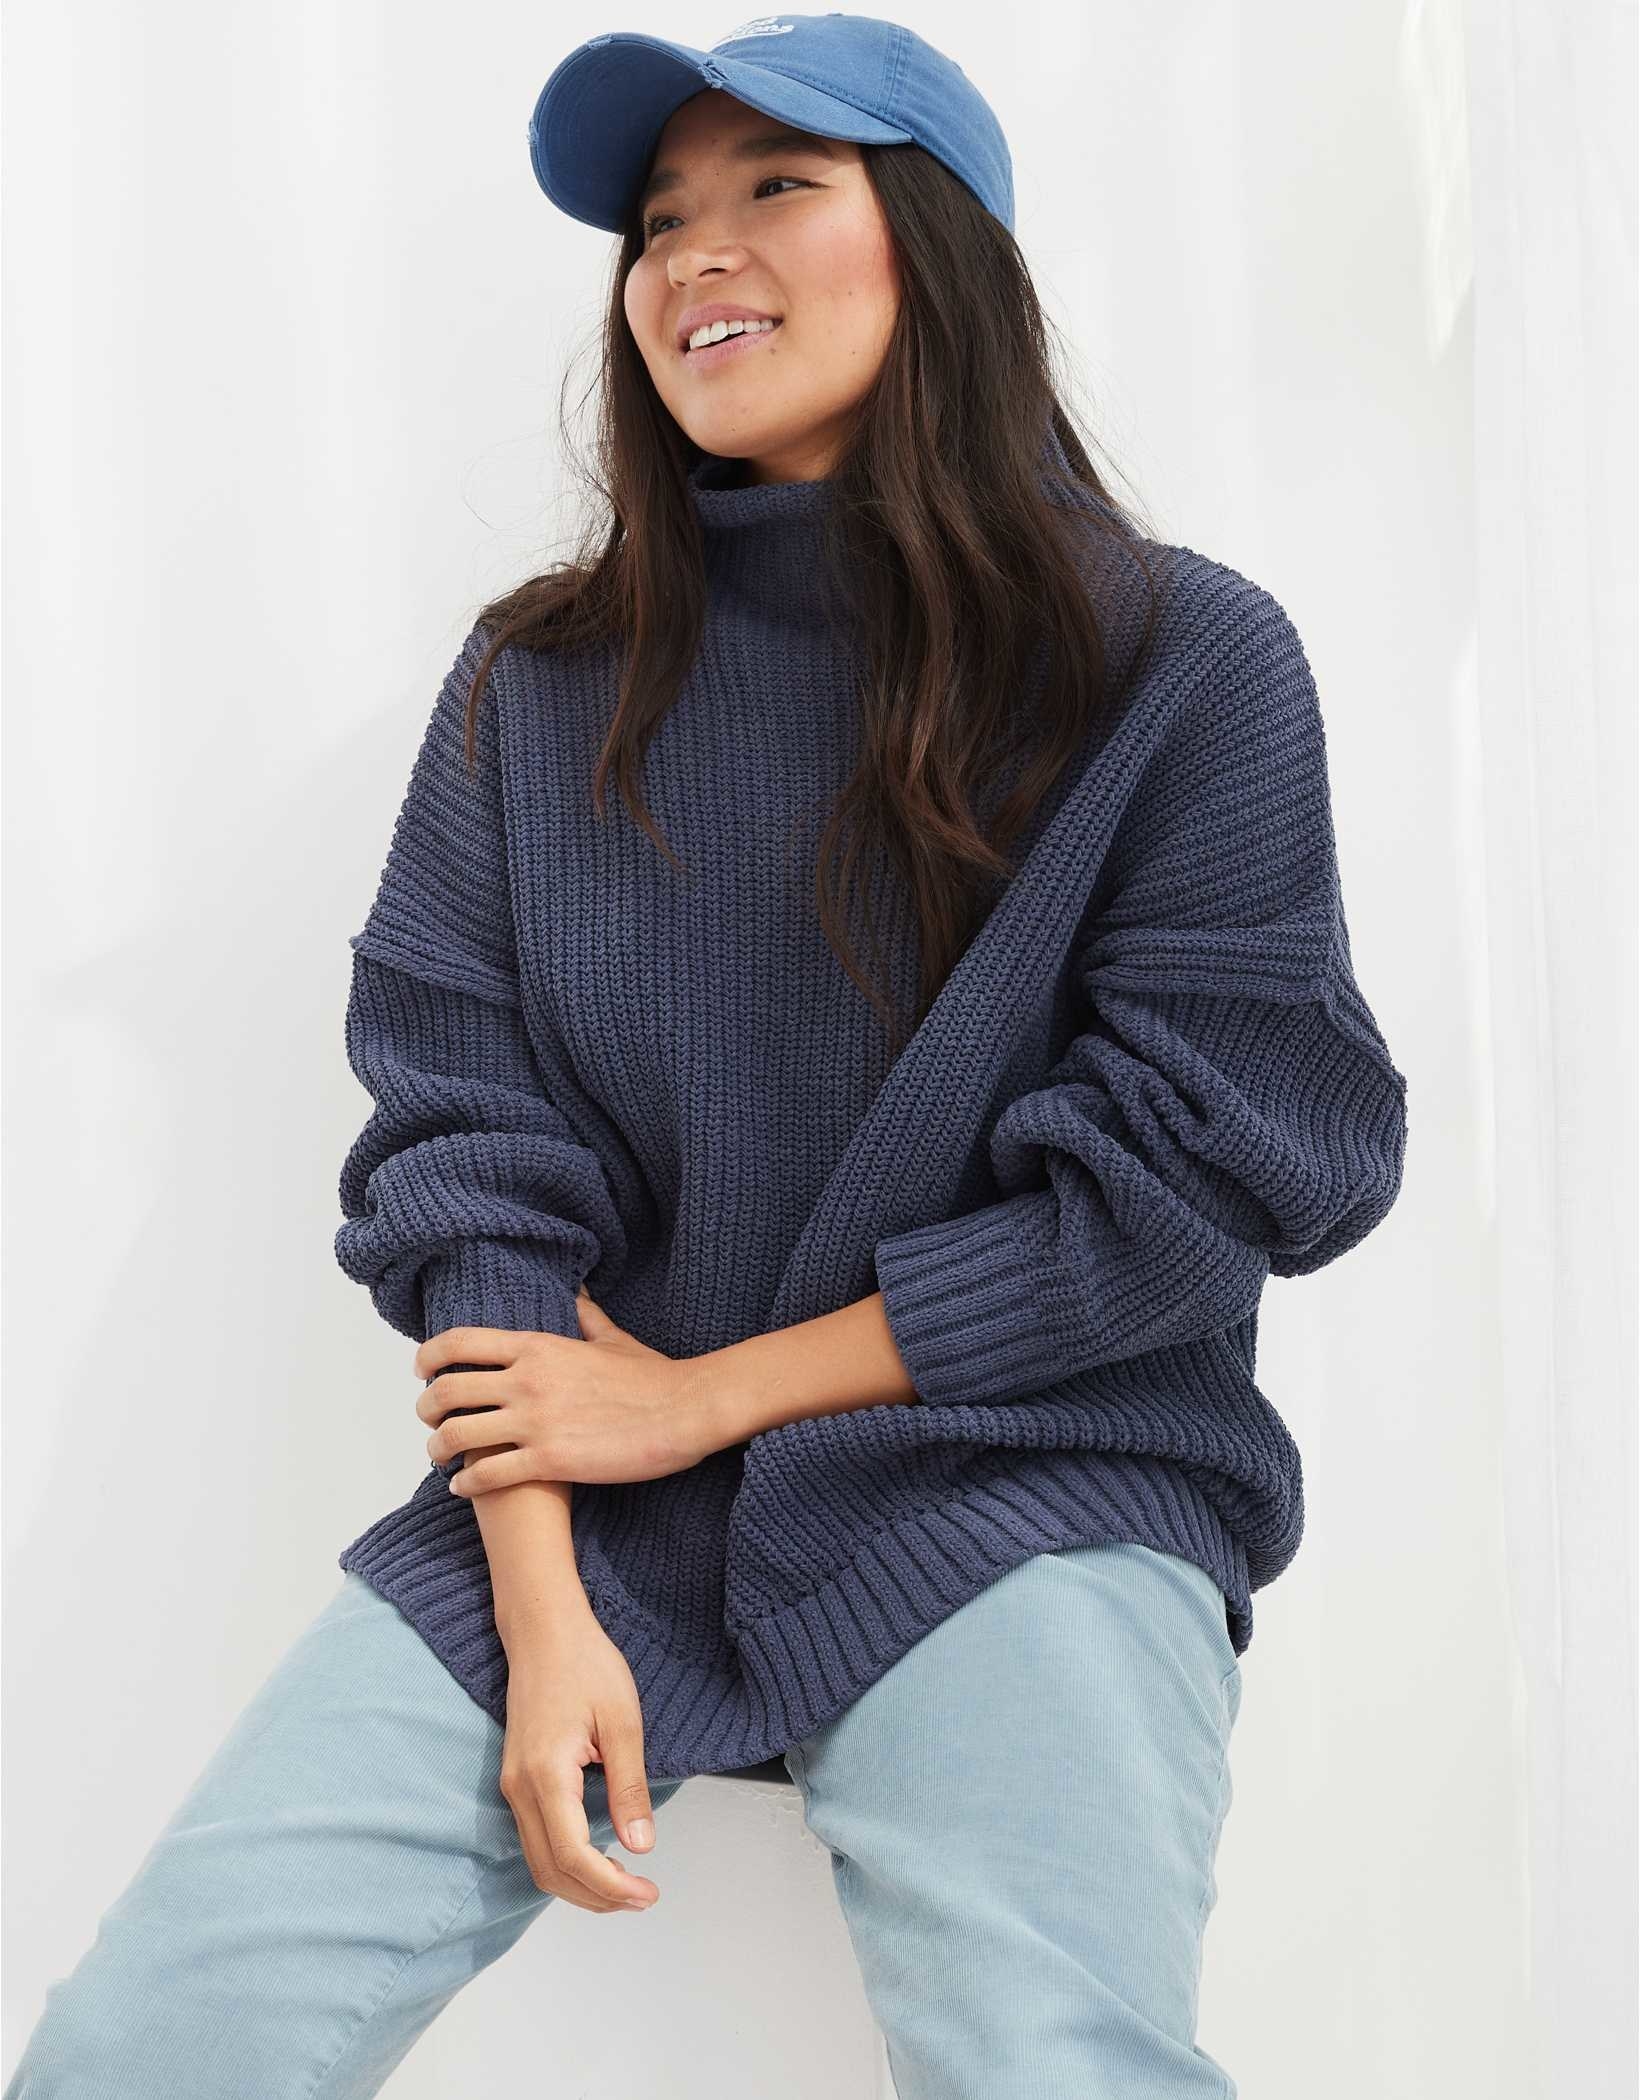 model wearing the sweater in navy blue with light blue pants and a blue hat